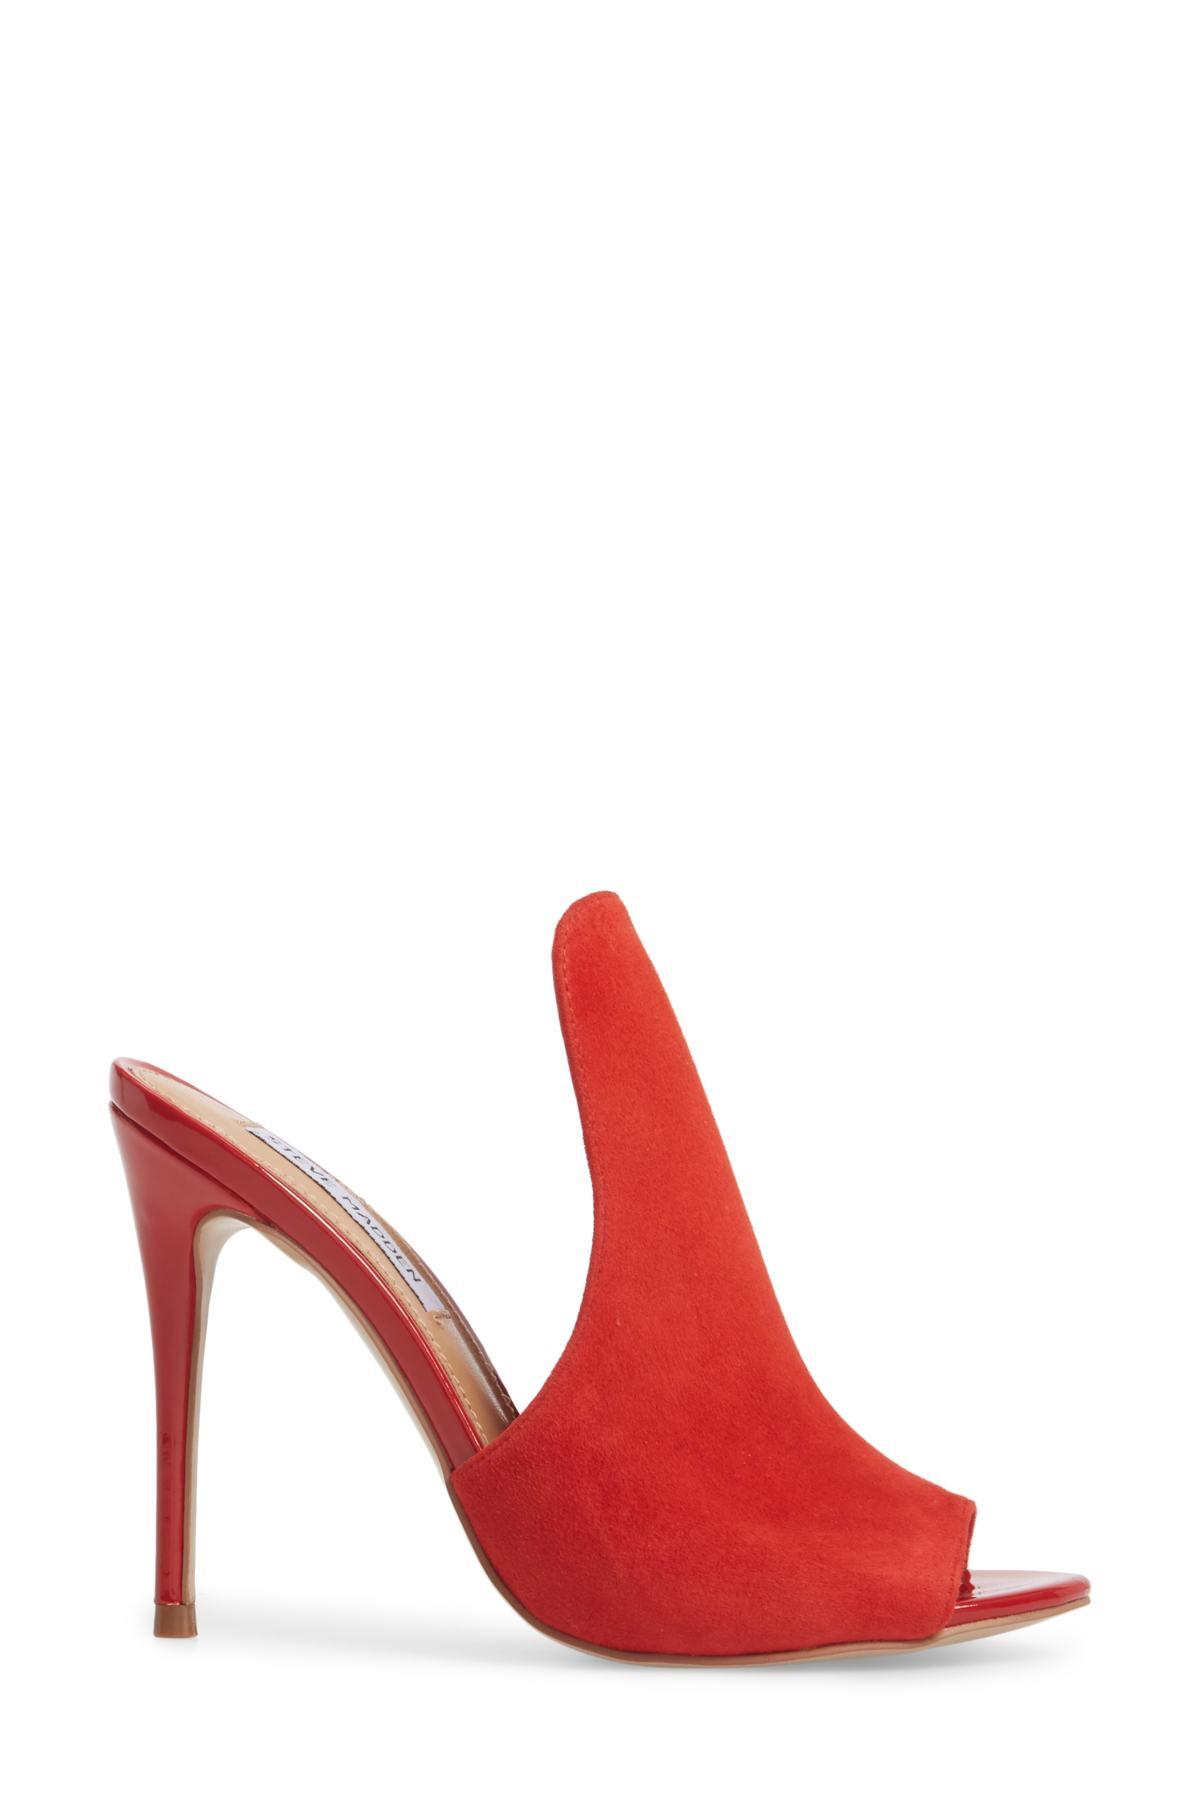 Sinful Sandal in Red Suede 